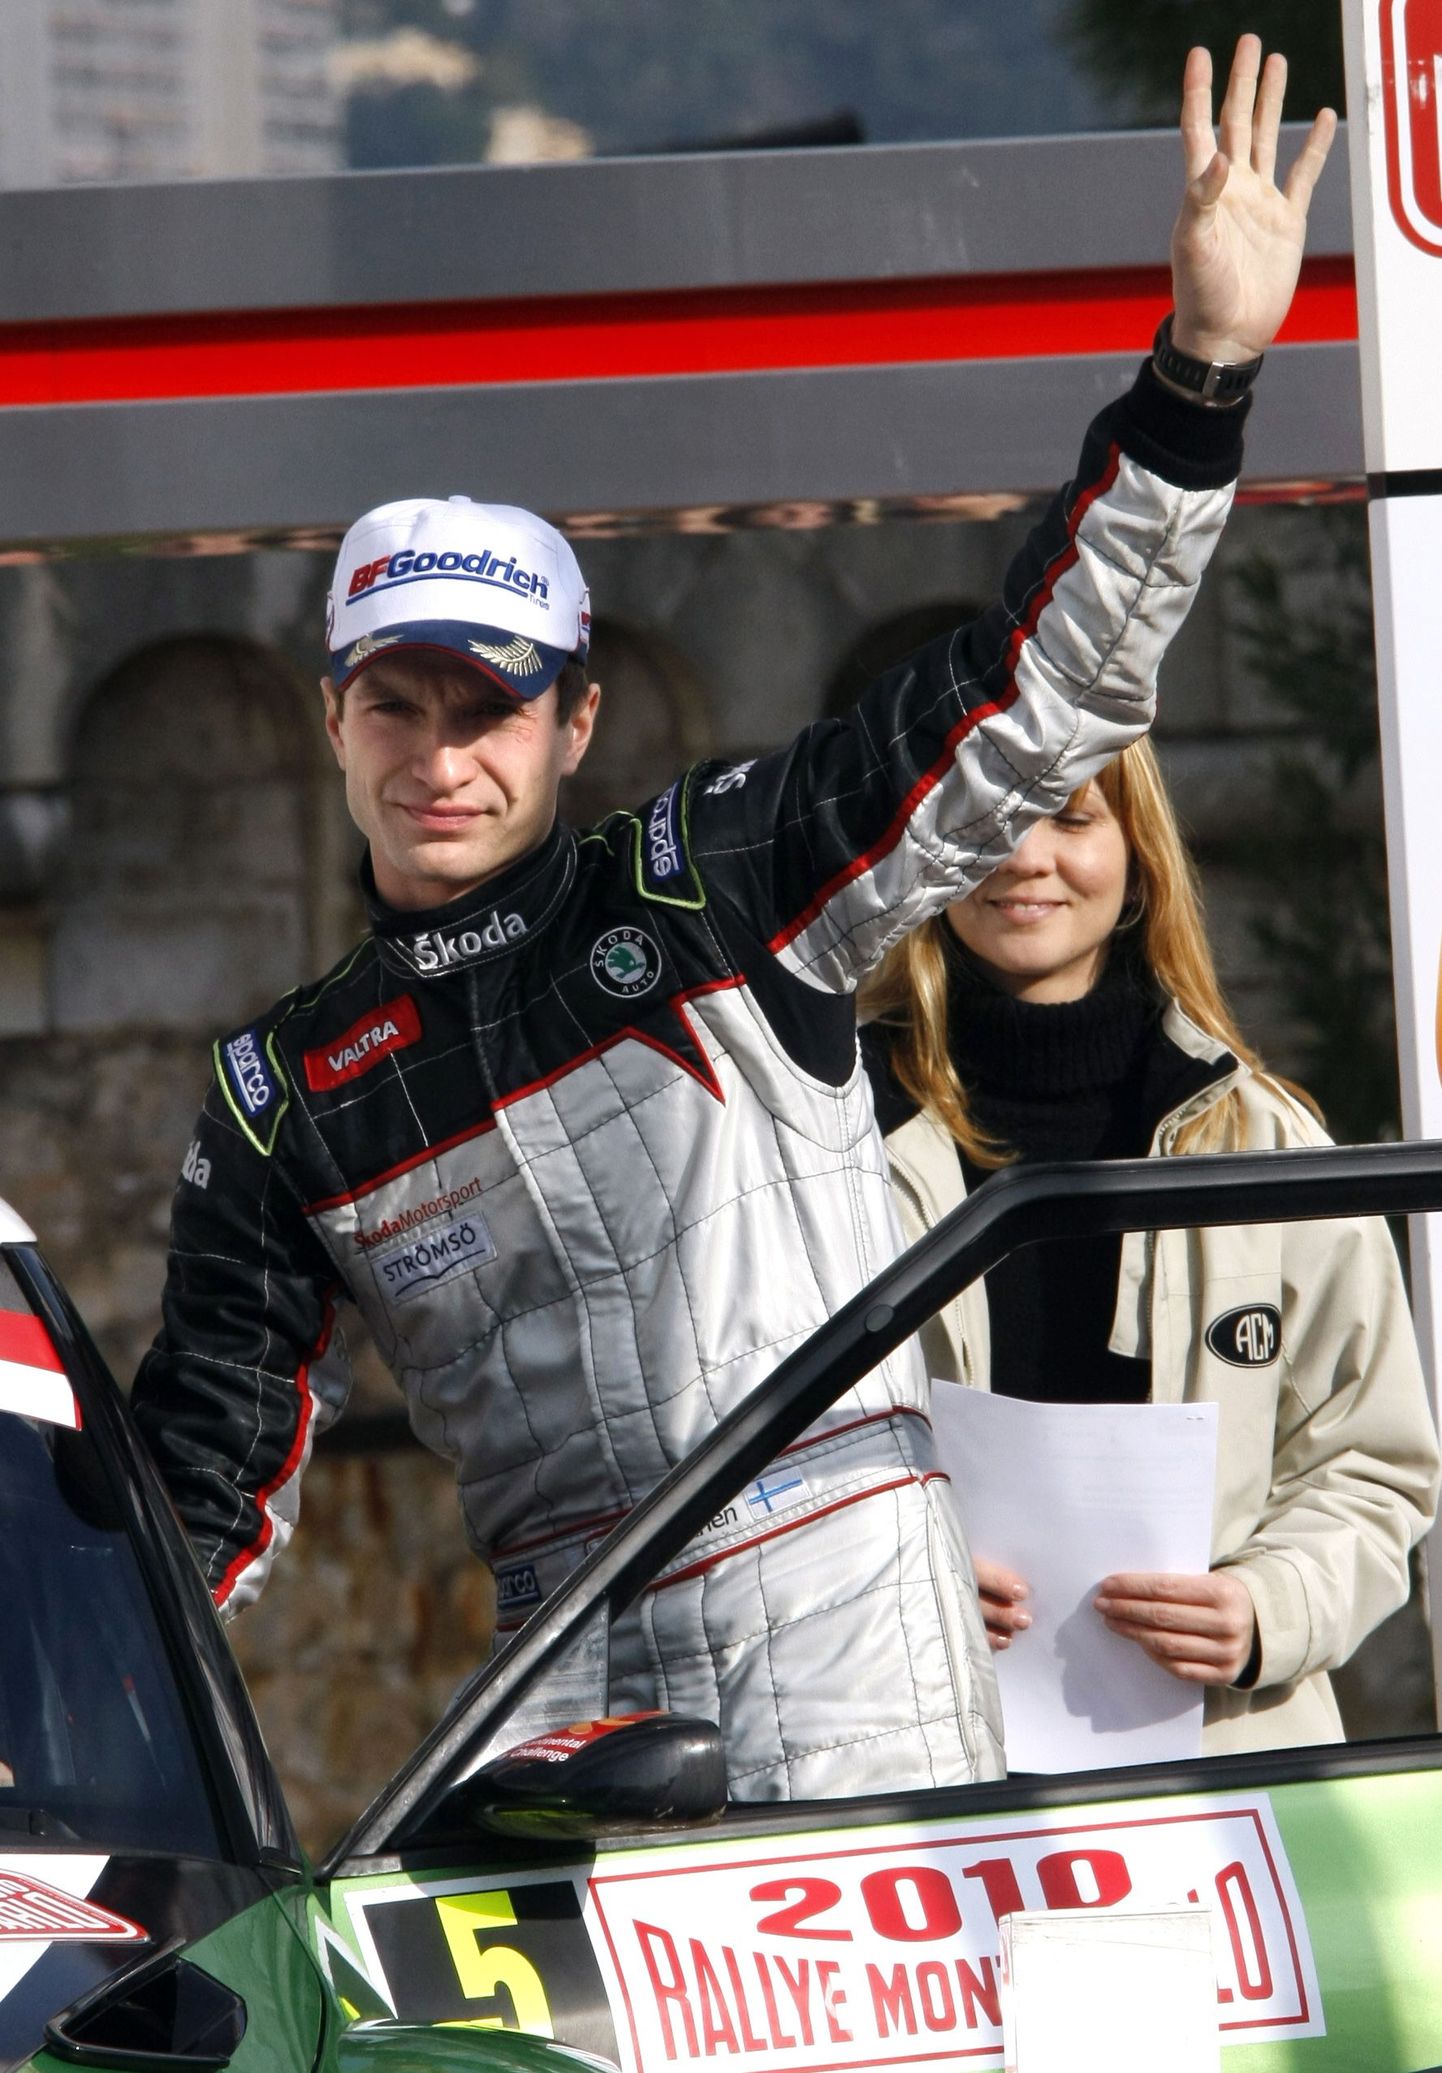 Juho Hanninen of Finland waves after taking second position in the 78th Monte Carlo Rally in Monaco January 23, 2010. Compatriot Mikko Hirvonen won the race.  REUTERS/Eric Gaillard (MONACO - Tags: SPORT MOTOR RACING)